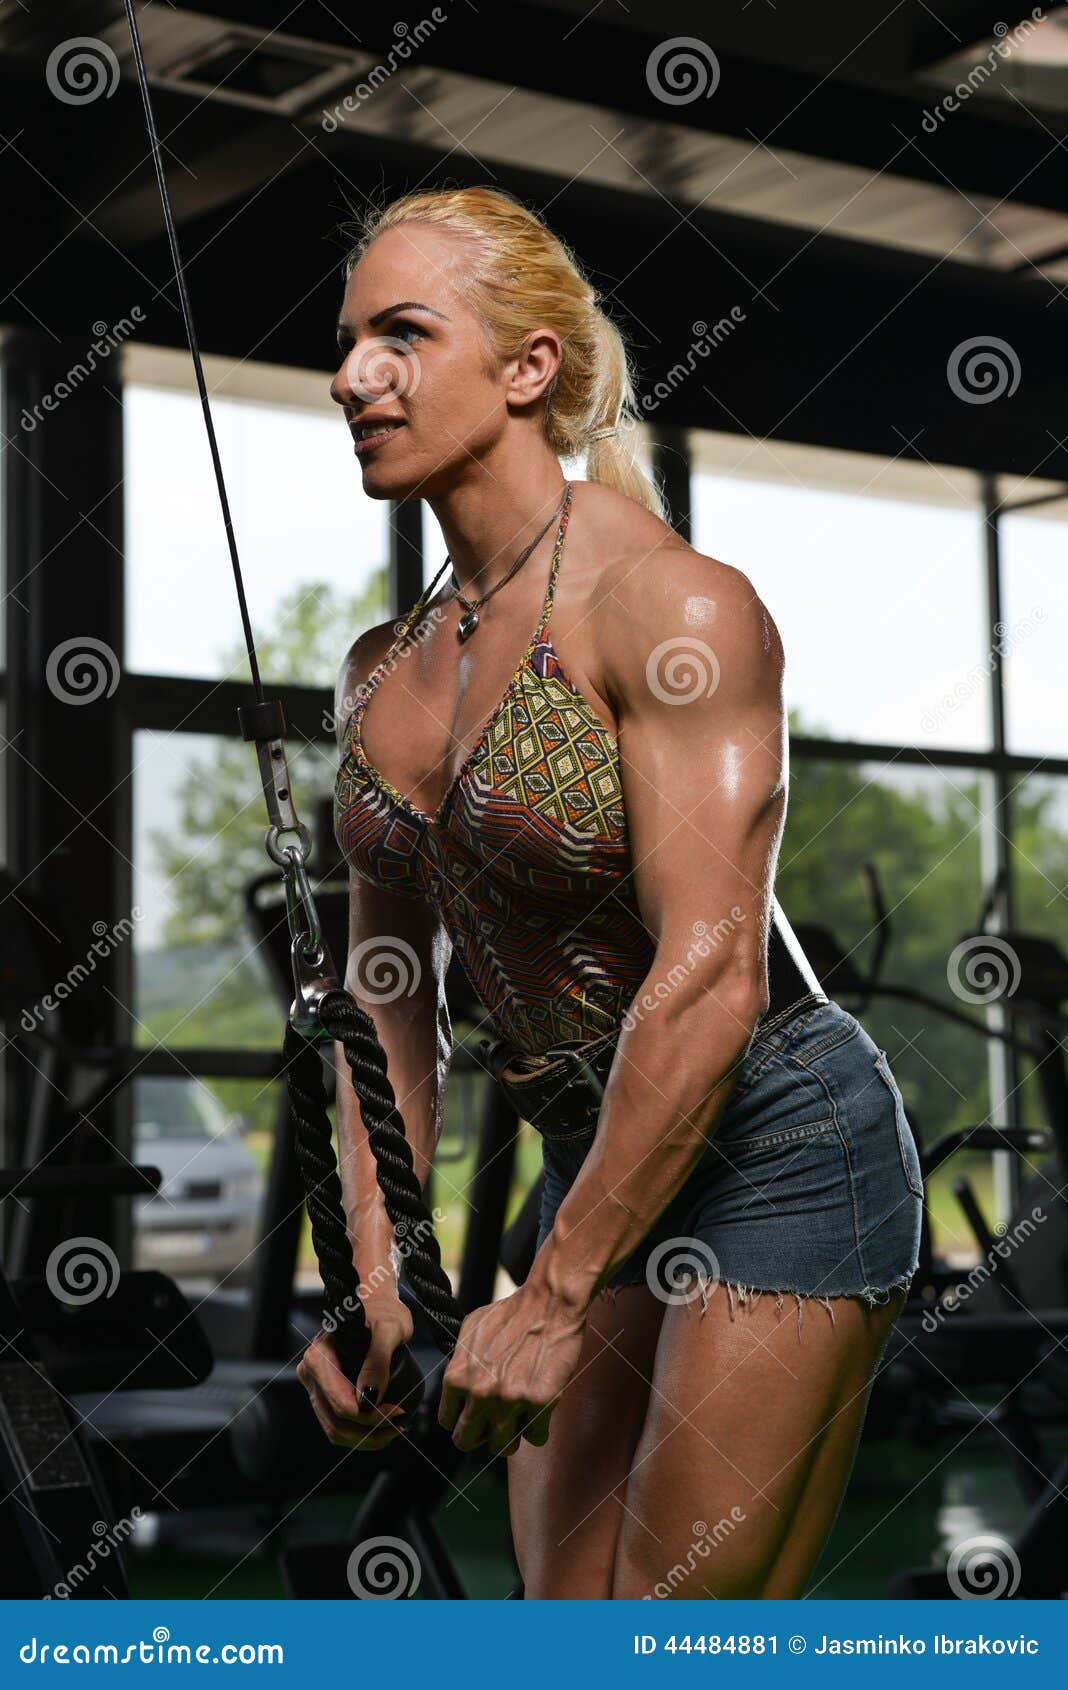 https://thumbs.dreamstime.com/z/female-bodybuilder-doing-heavy-weight-exercise-triceps-young-woman-44484881.jpg